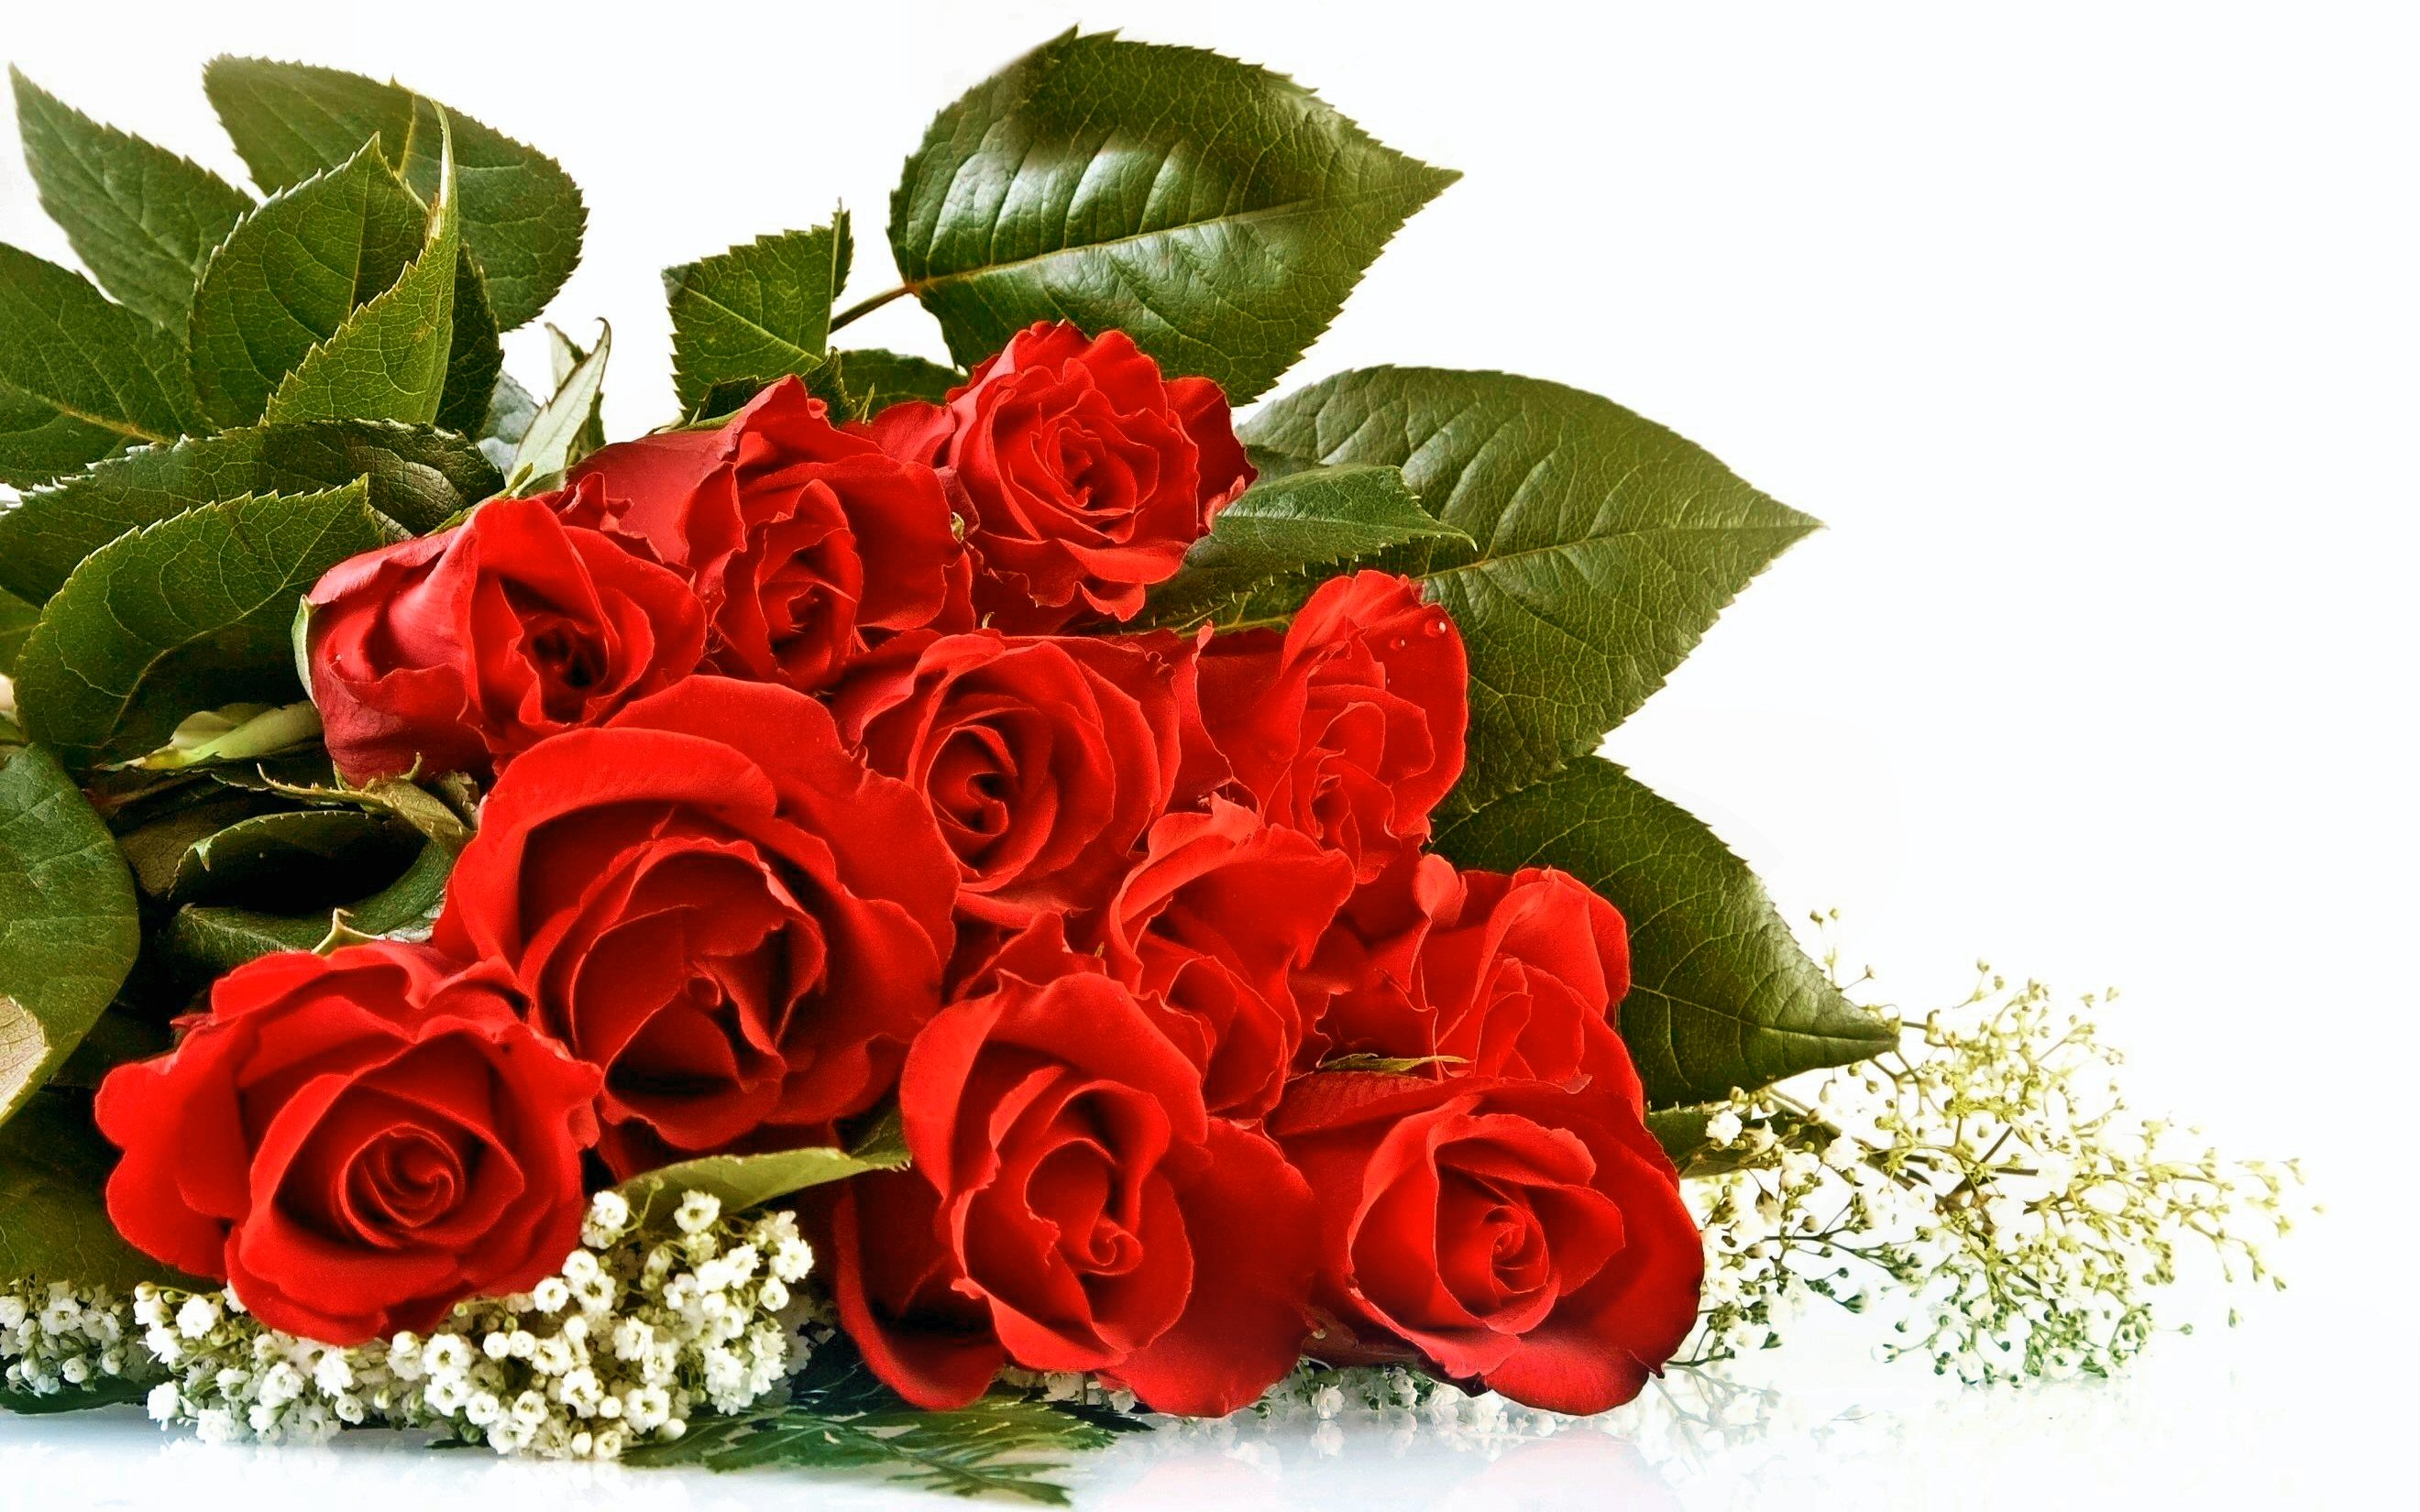 red flower, rose, flowers, flower, bouquet, red rose, valentine's day, earth, leaf